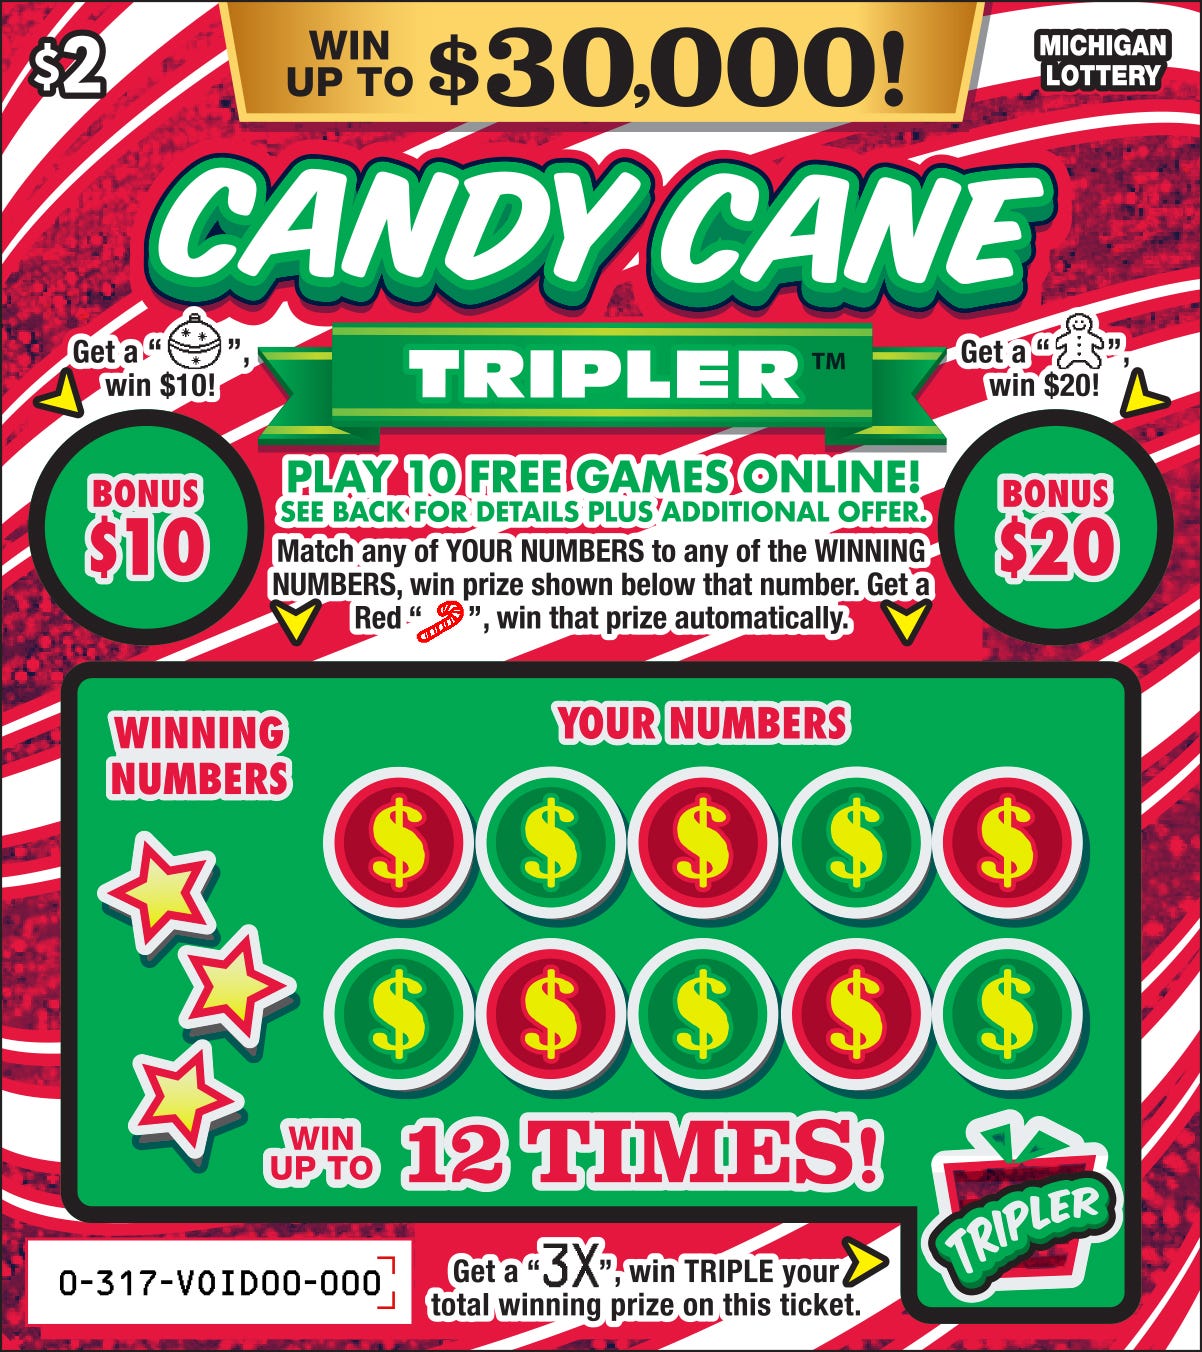 Michigan Lottery 4 new holidaythemed instant scratchoff games